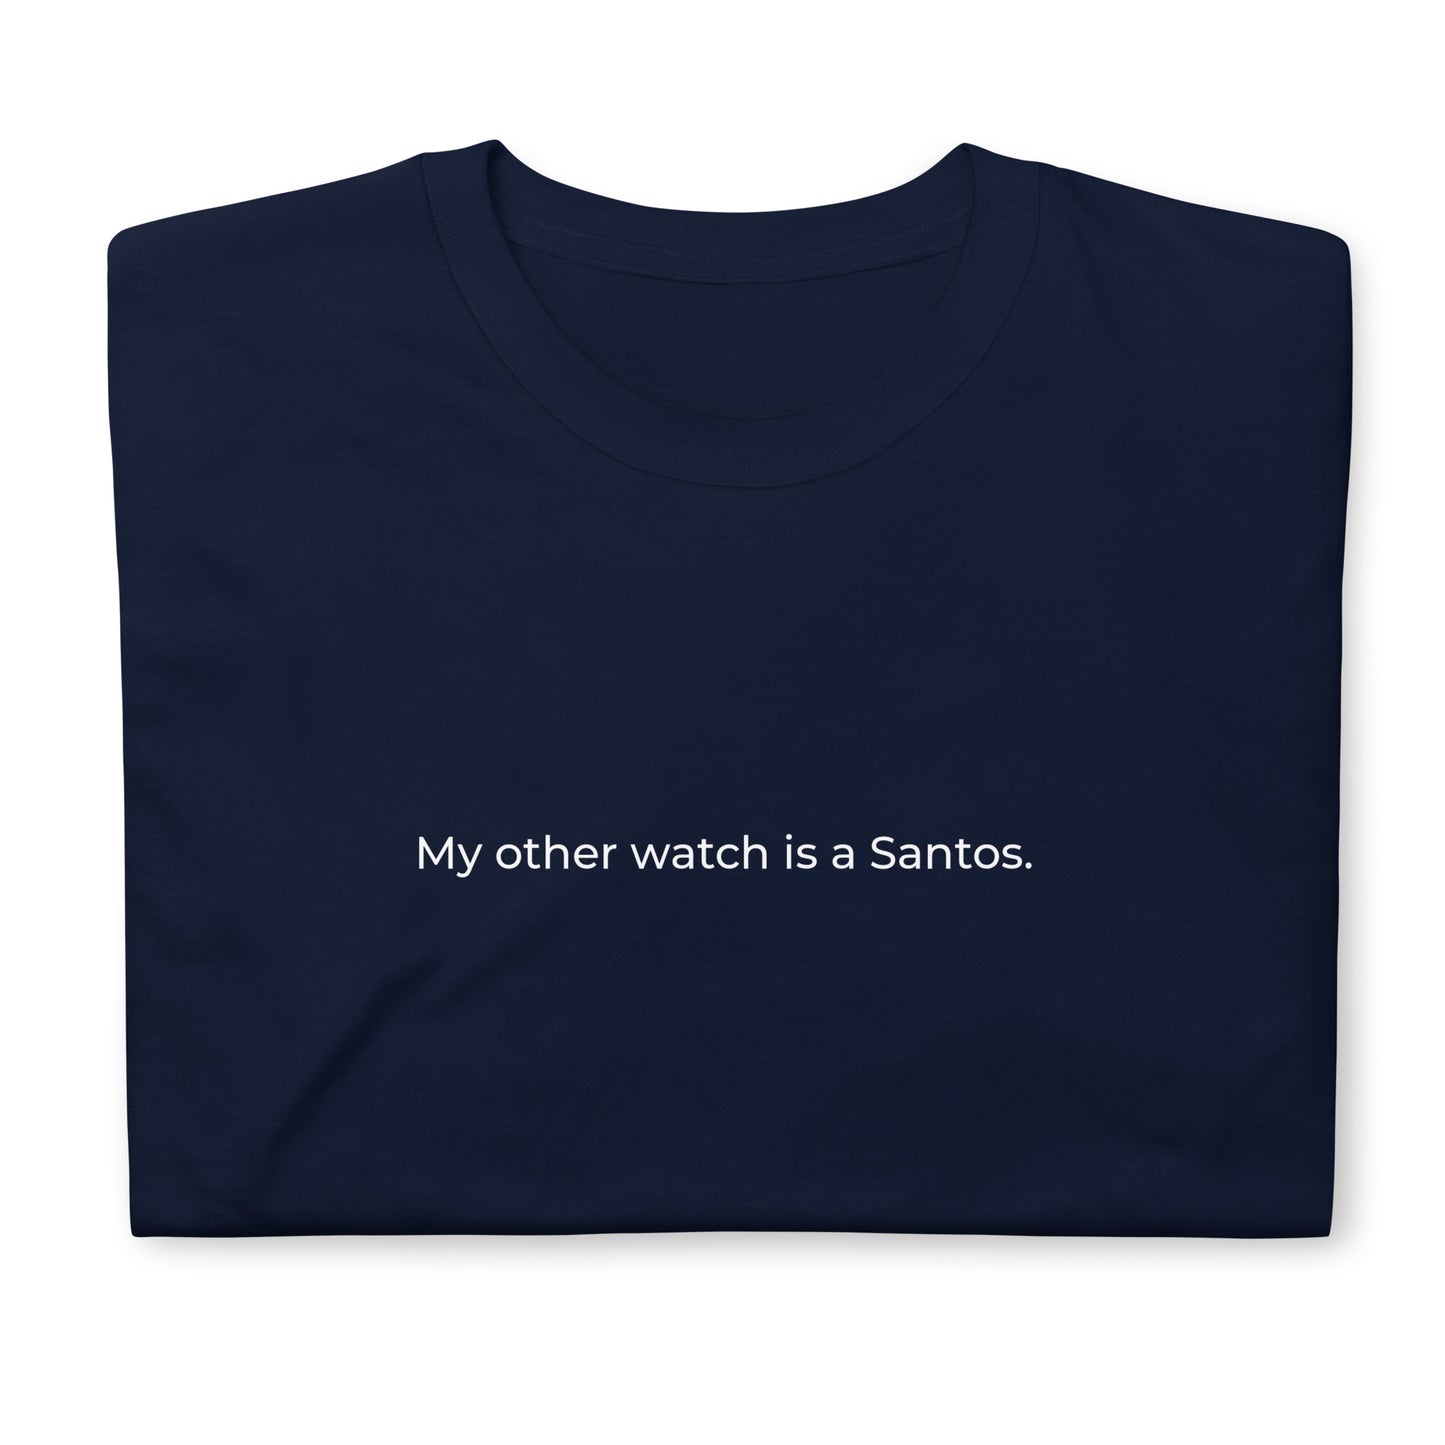 My other watch is a Santos.